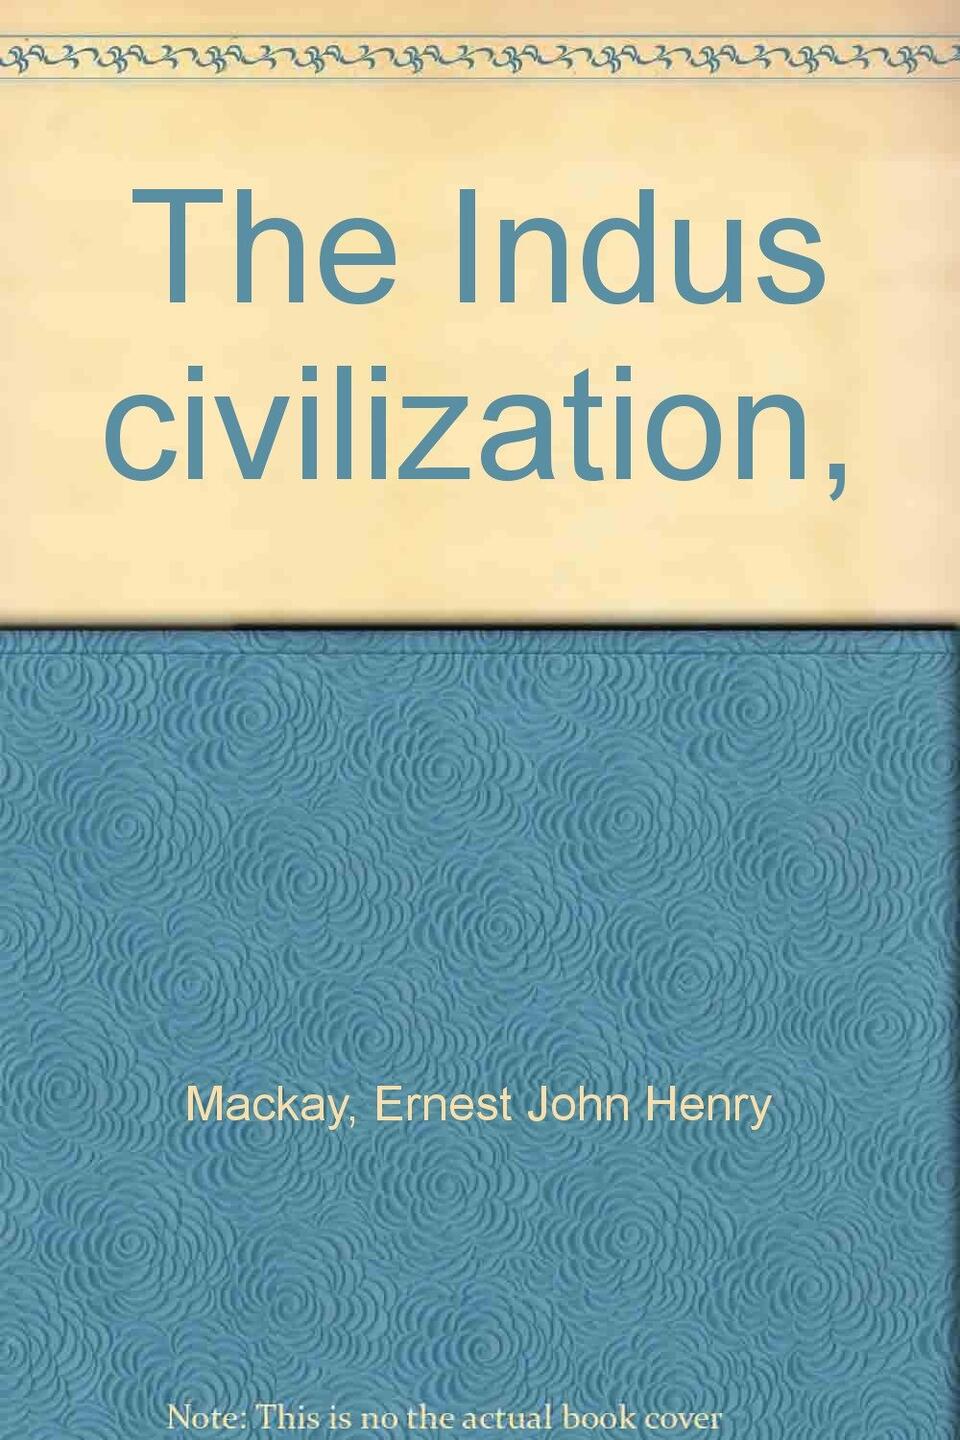 The Indus Civilization by Ernest Mackay 